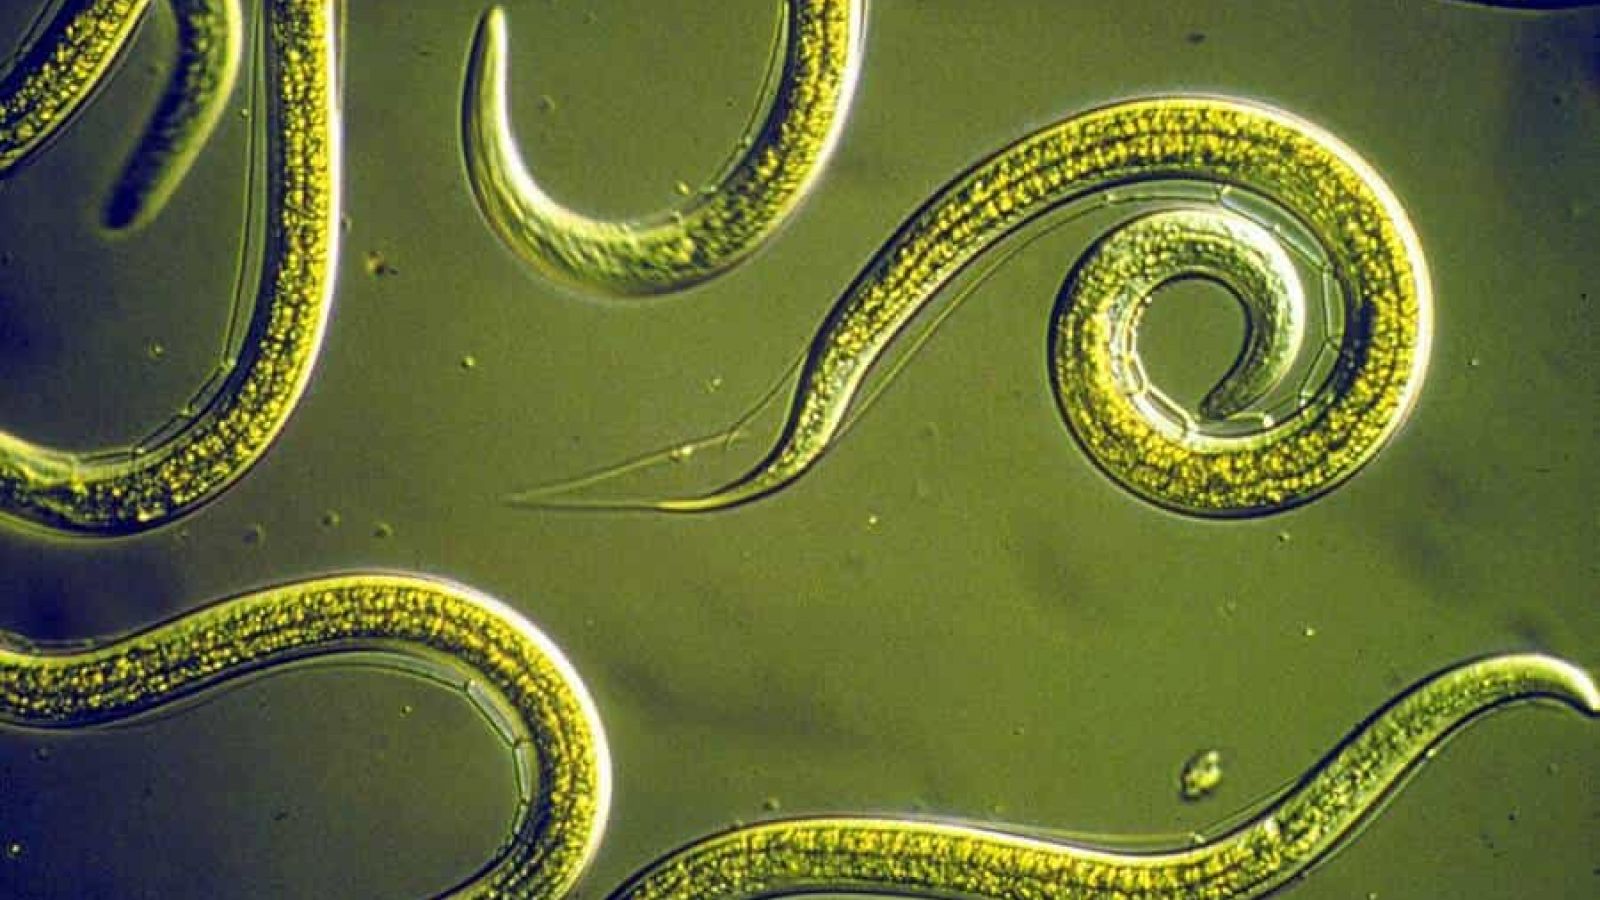 Nematodes in medical research